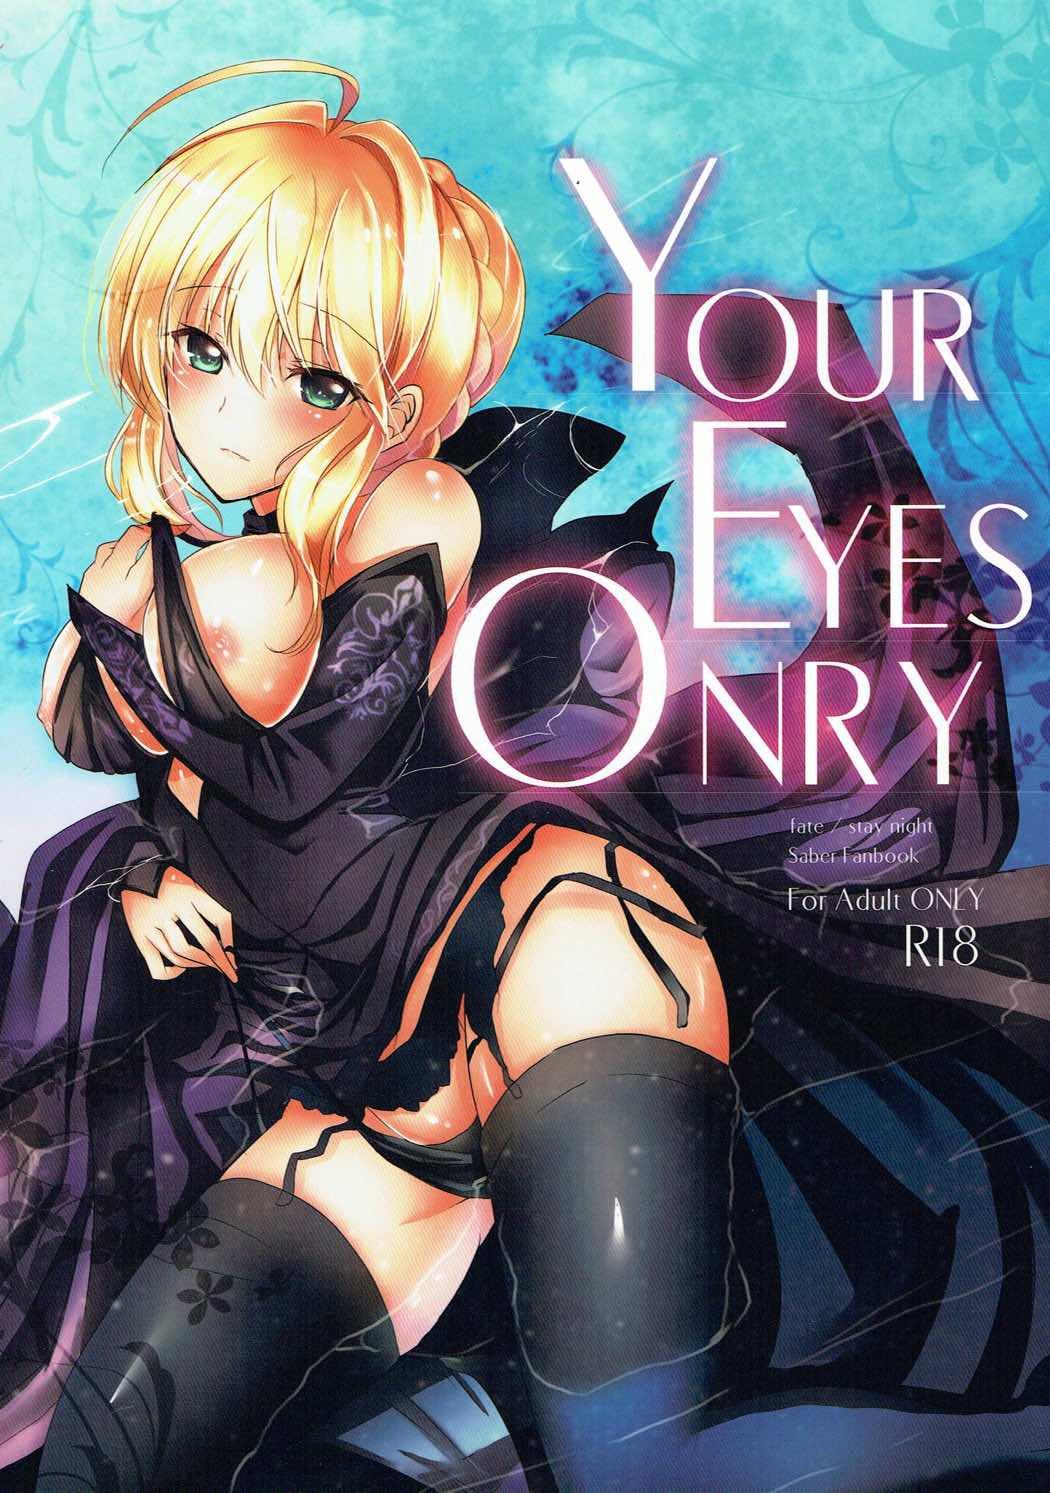 Vintage YOUR EYES ONRY - Fate stay night Fucking Hard - Picture 1